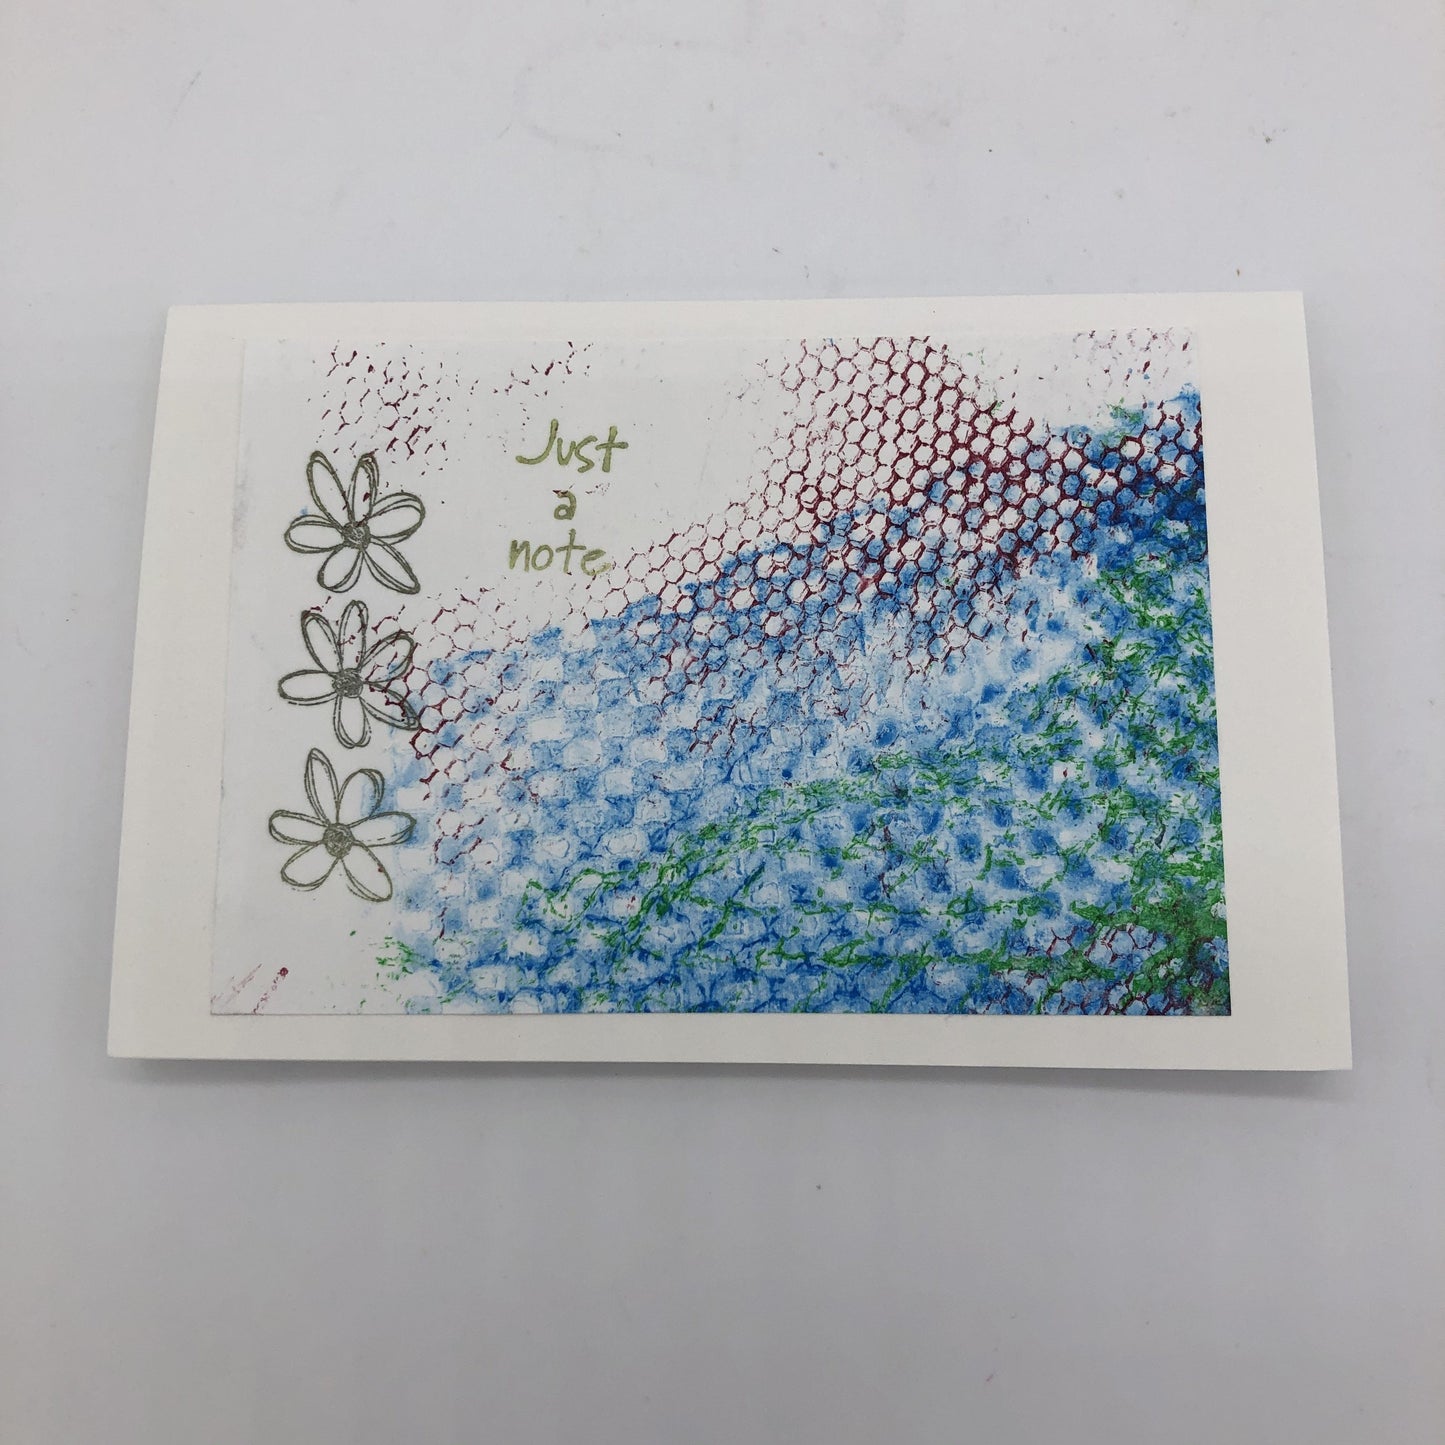 White greeting card with rubbings of a textured net material in green and maroon.  There is also a large swatch of lined up circle texture in blue.  On top of the texture are three stamped outlined daisys in black and the words "Just a note" in green.